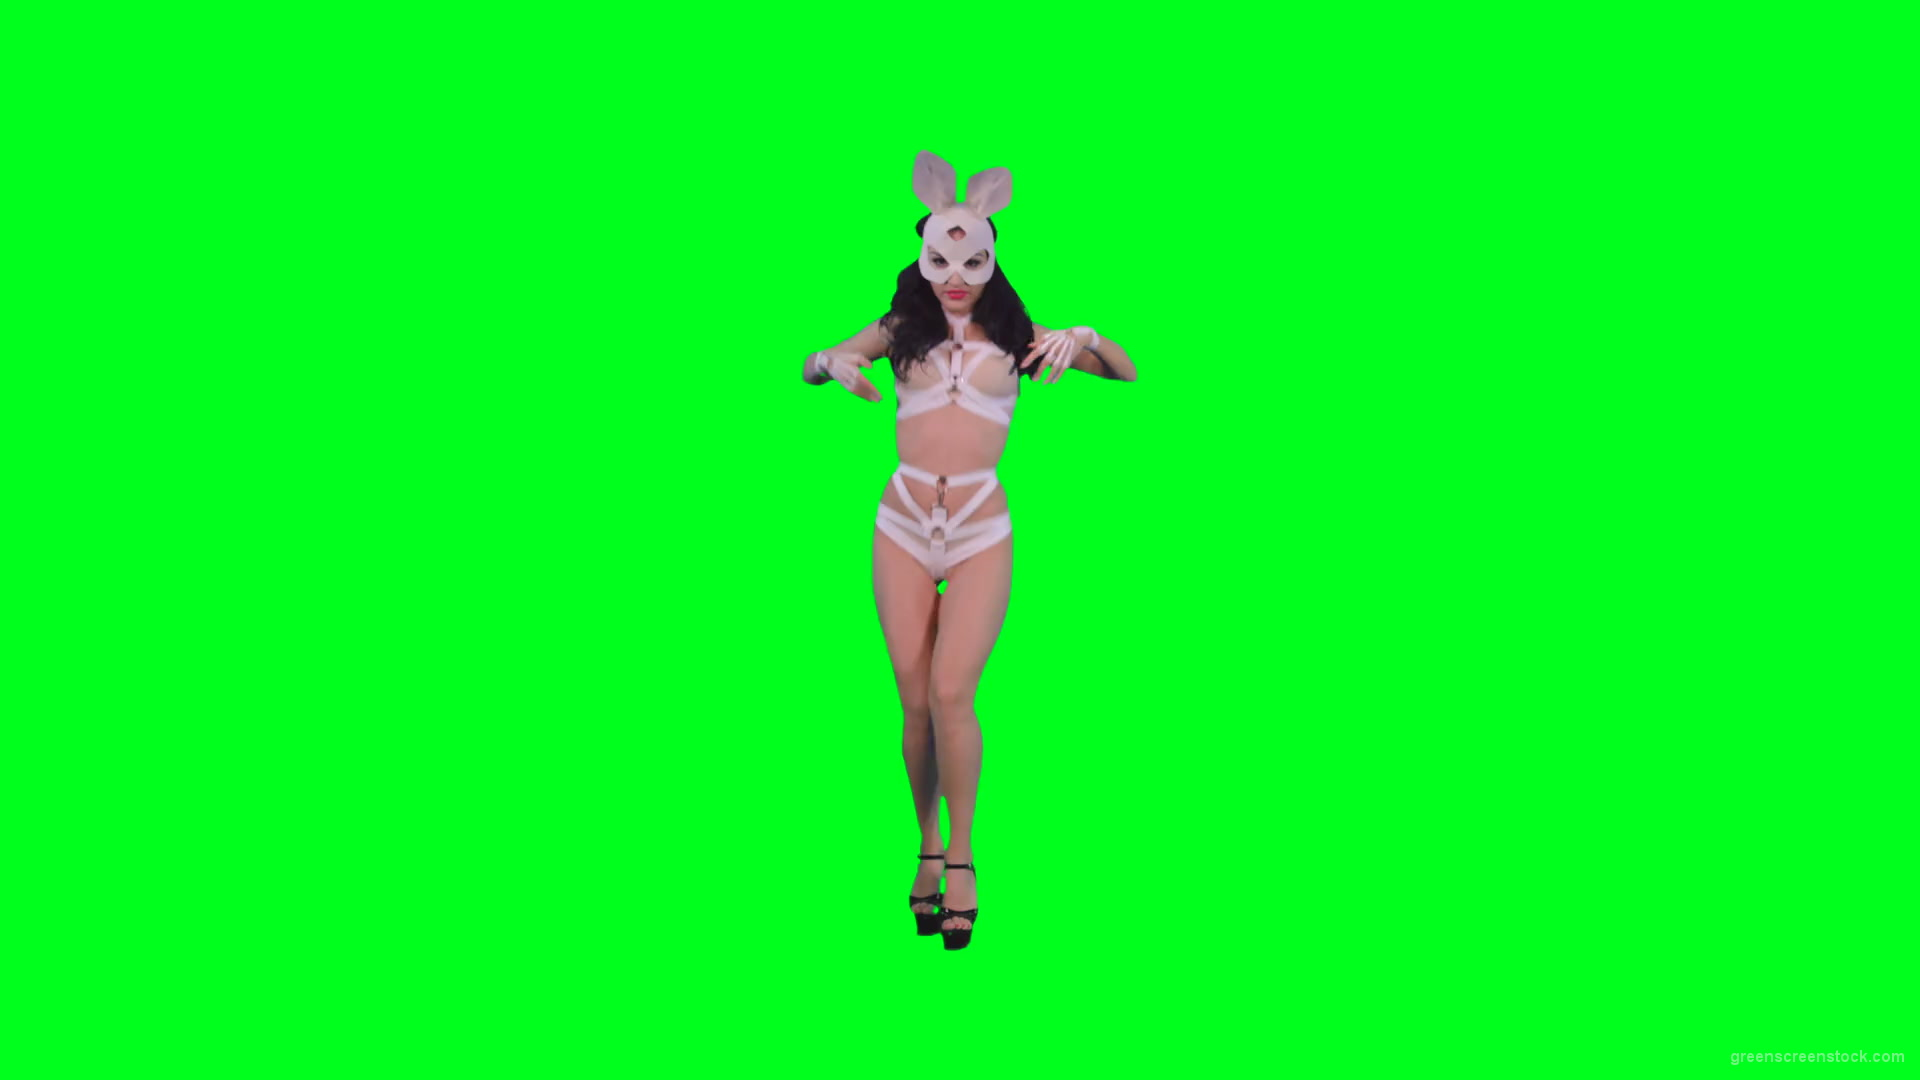 Black-hair-sexy-girl-in-playboy-costume-dancing-go-go-on-green-screen-4K-Video-Footage-1920_001 Green Screen Stock